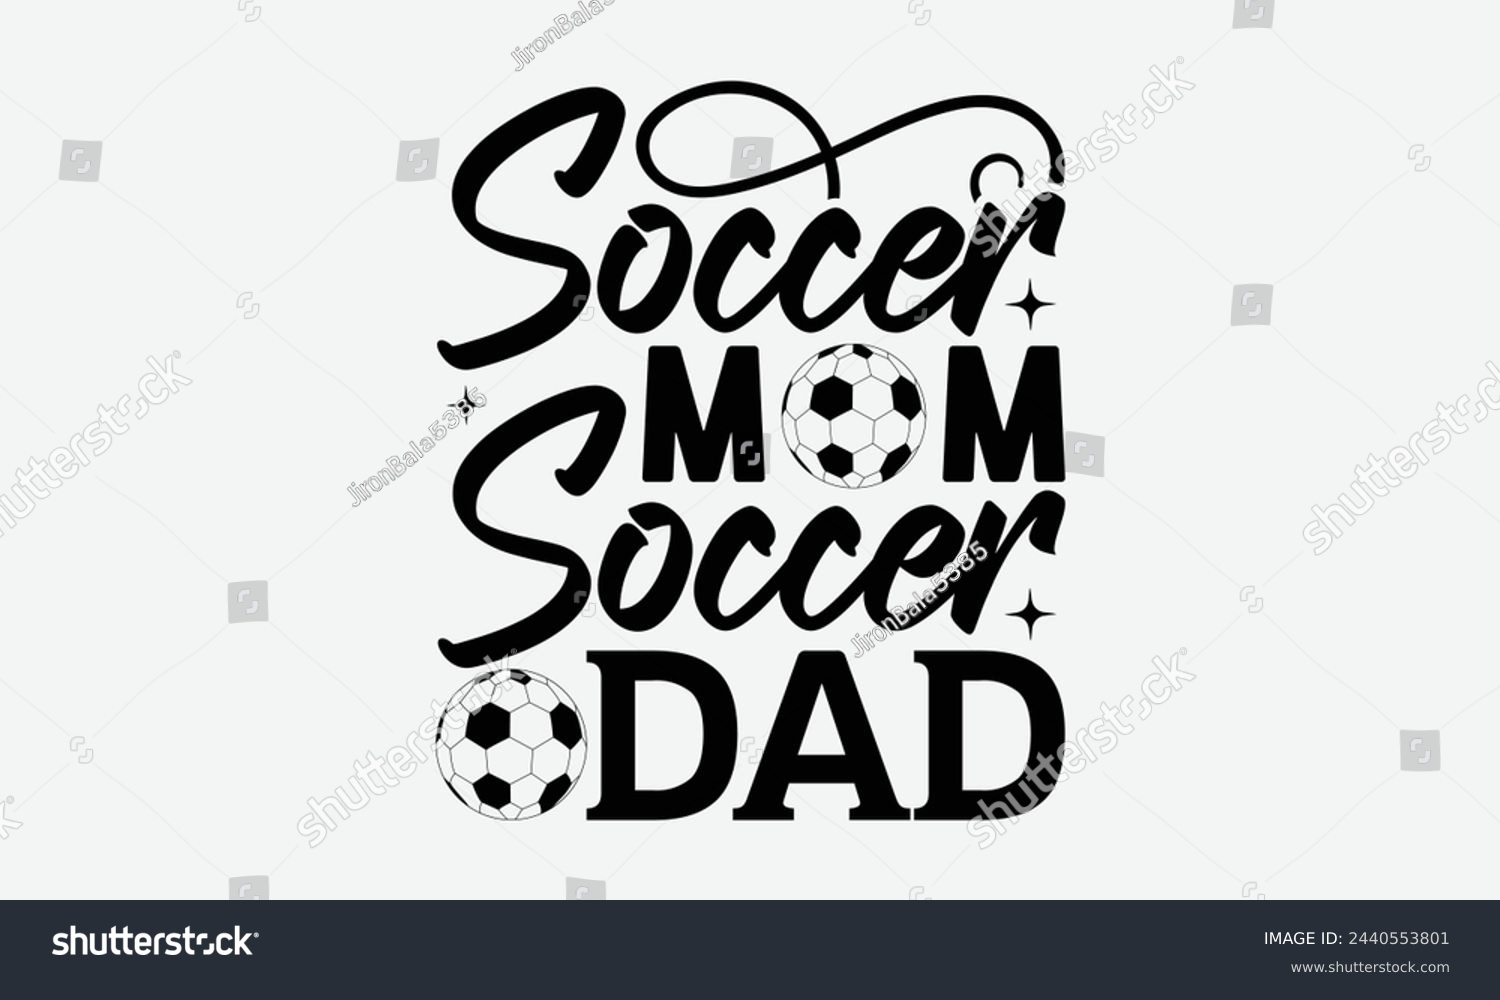 SVG of Soccer Mom Soccer Dad - Mom t-shirt design, isolated on white background, this illustration can be used as a print on t-shirts and bags, cover book, template, stationary or as a poster. svg